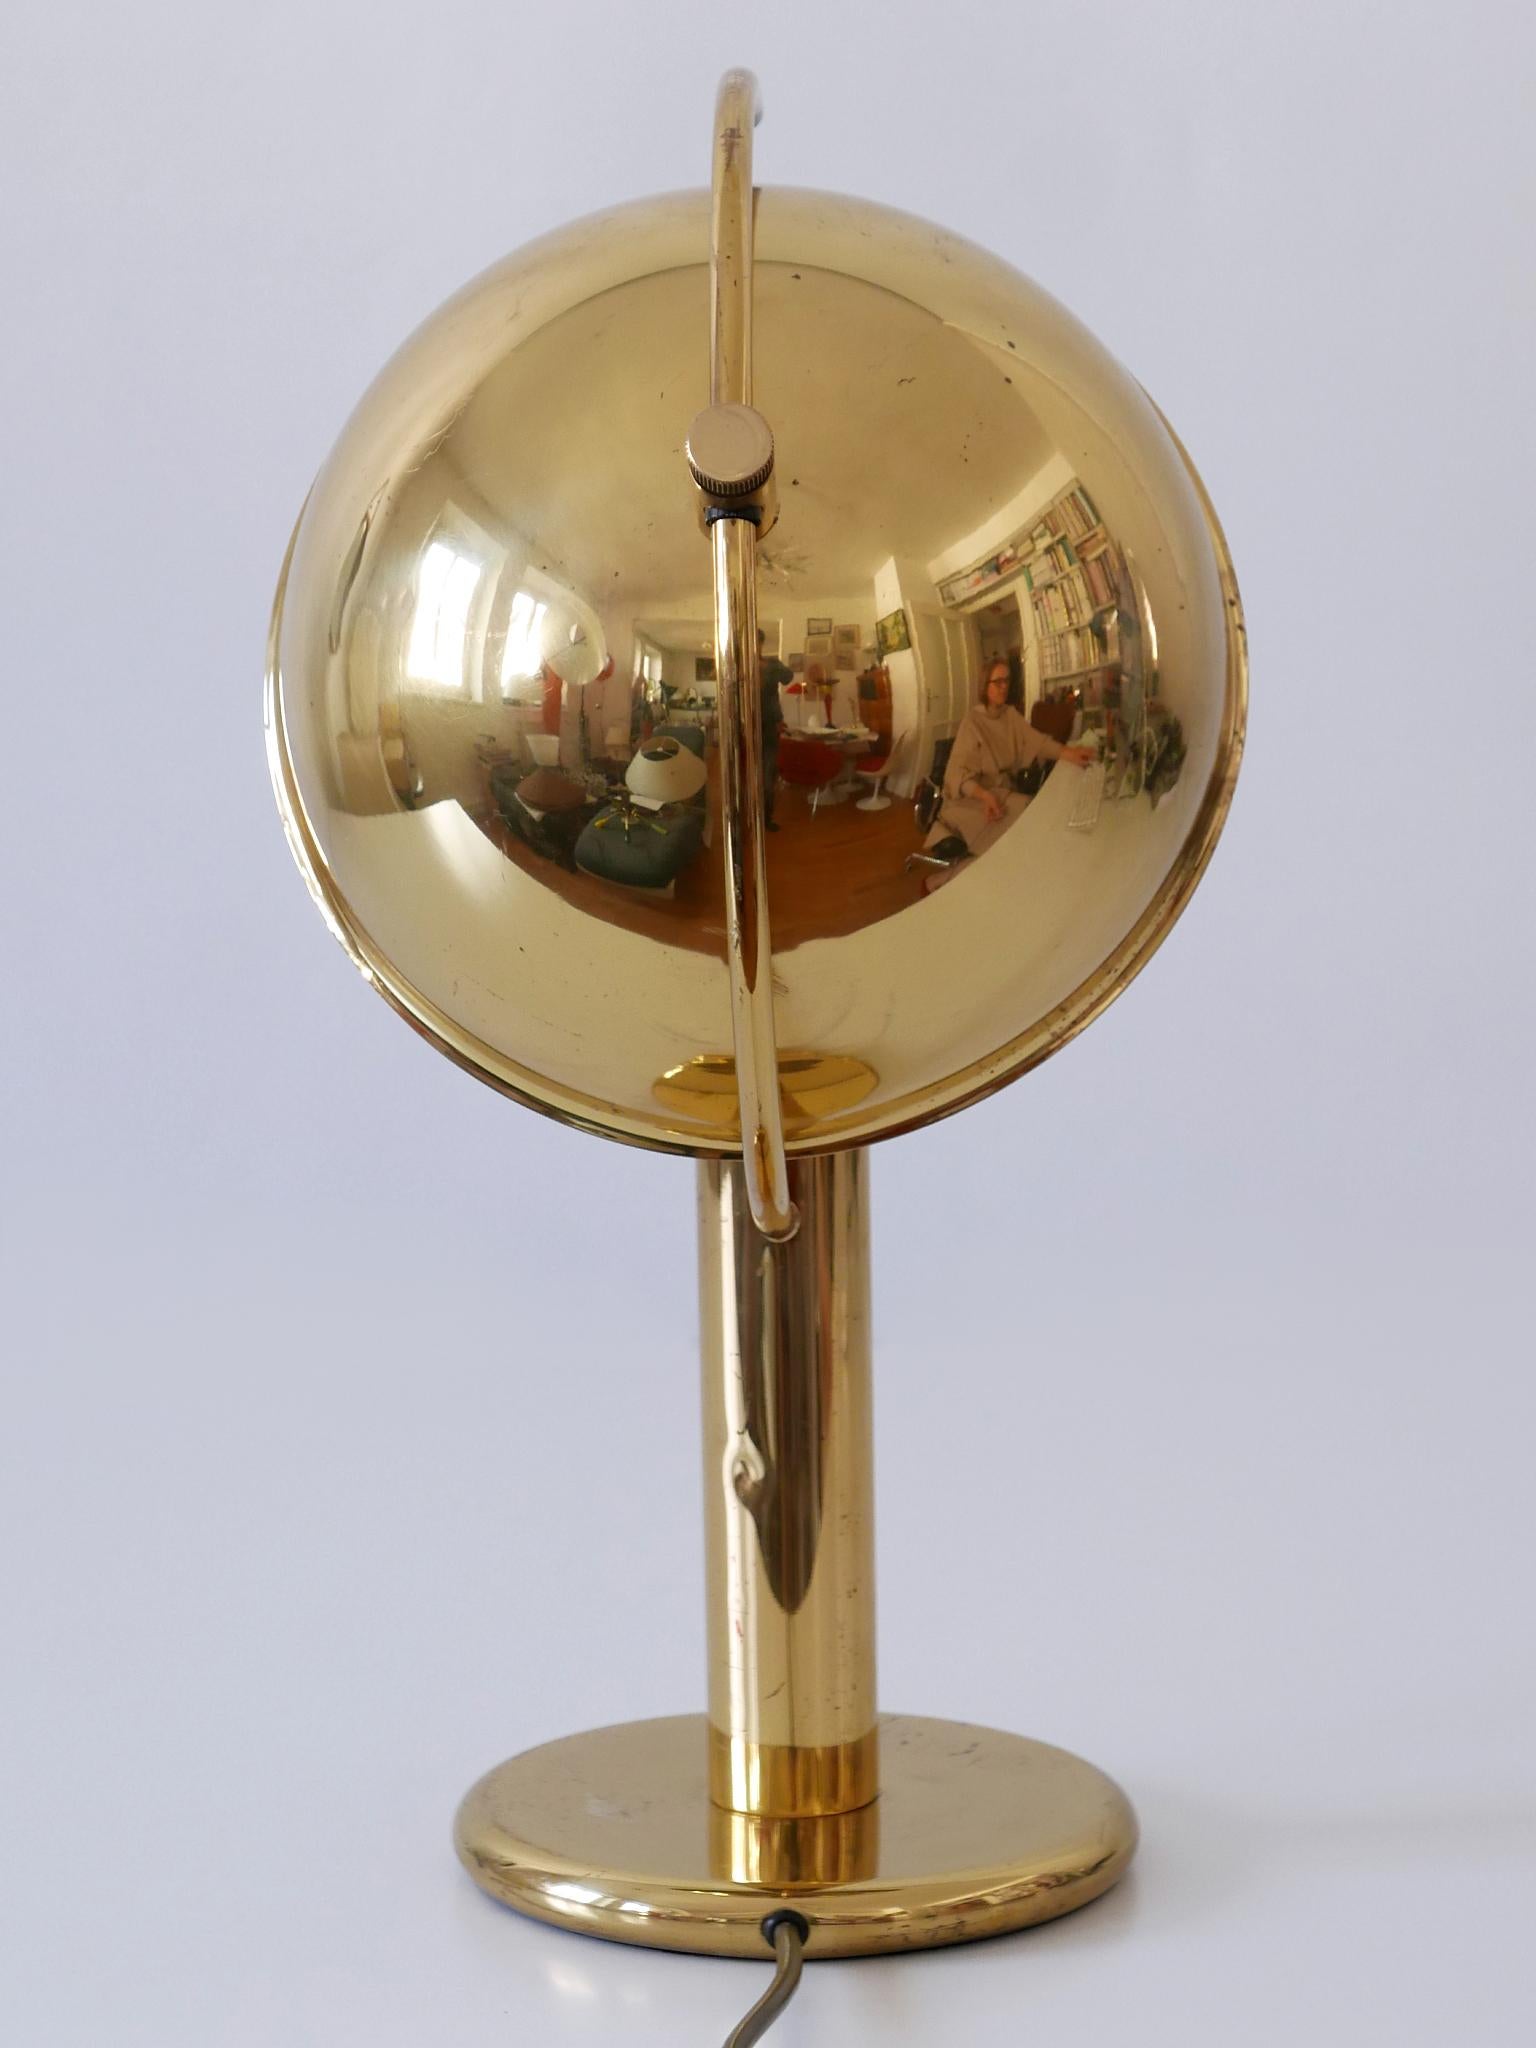 Exceptional Mid-Century Modern Brass Table Lamp by Gebrüder Cosack Germany 1960s For Sale 12